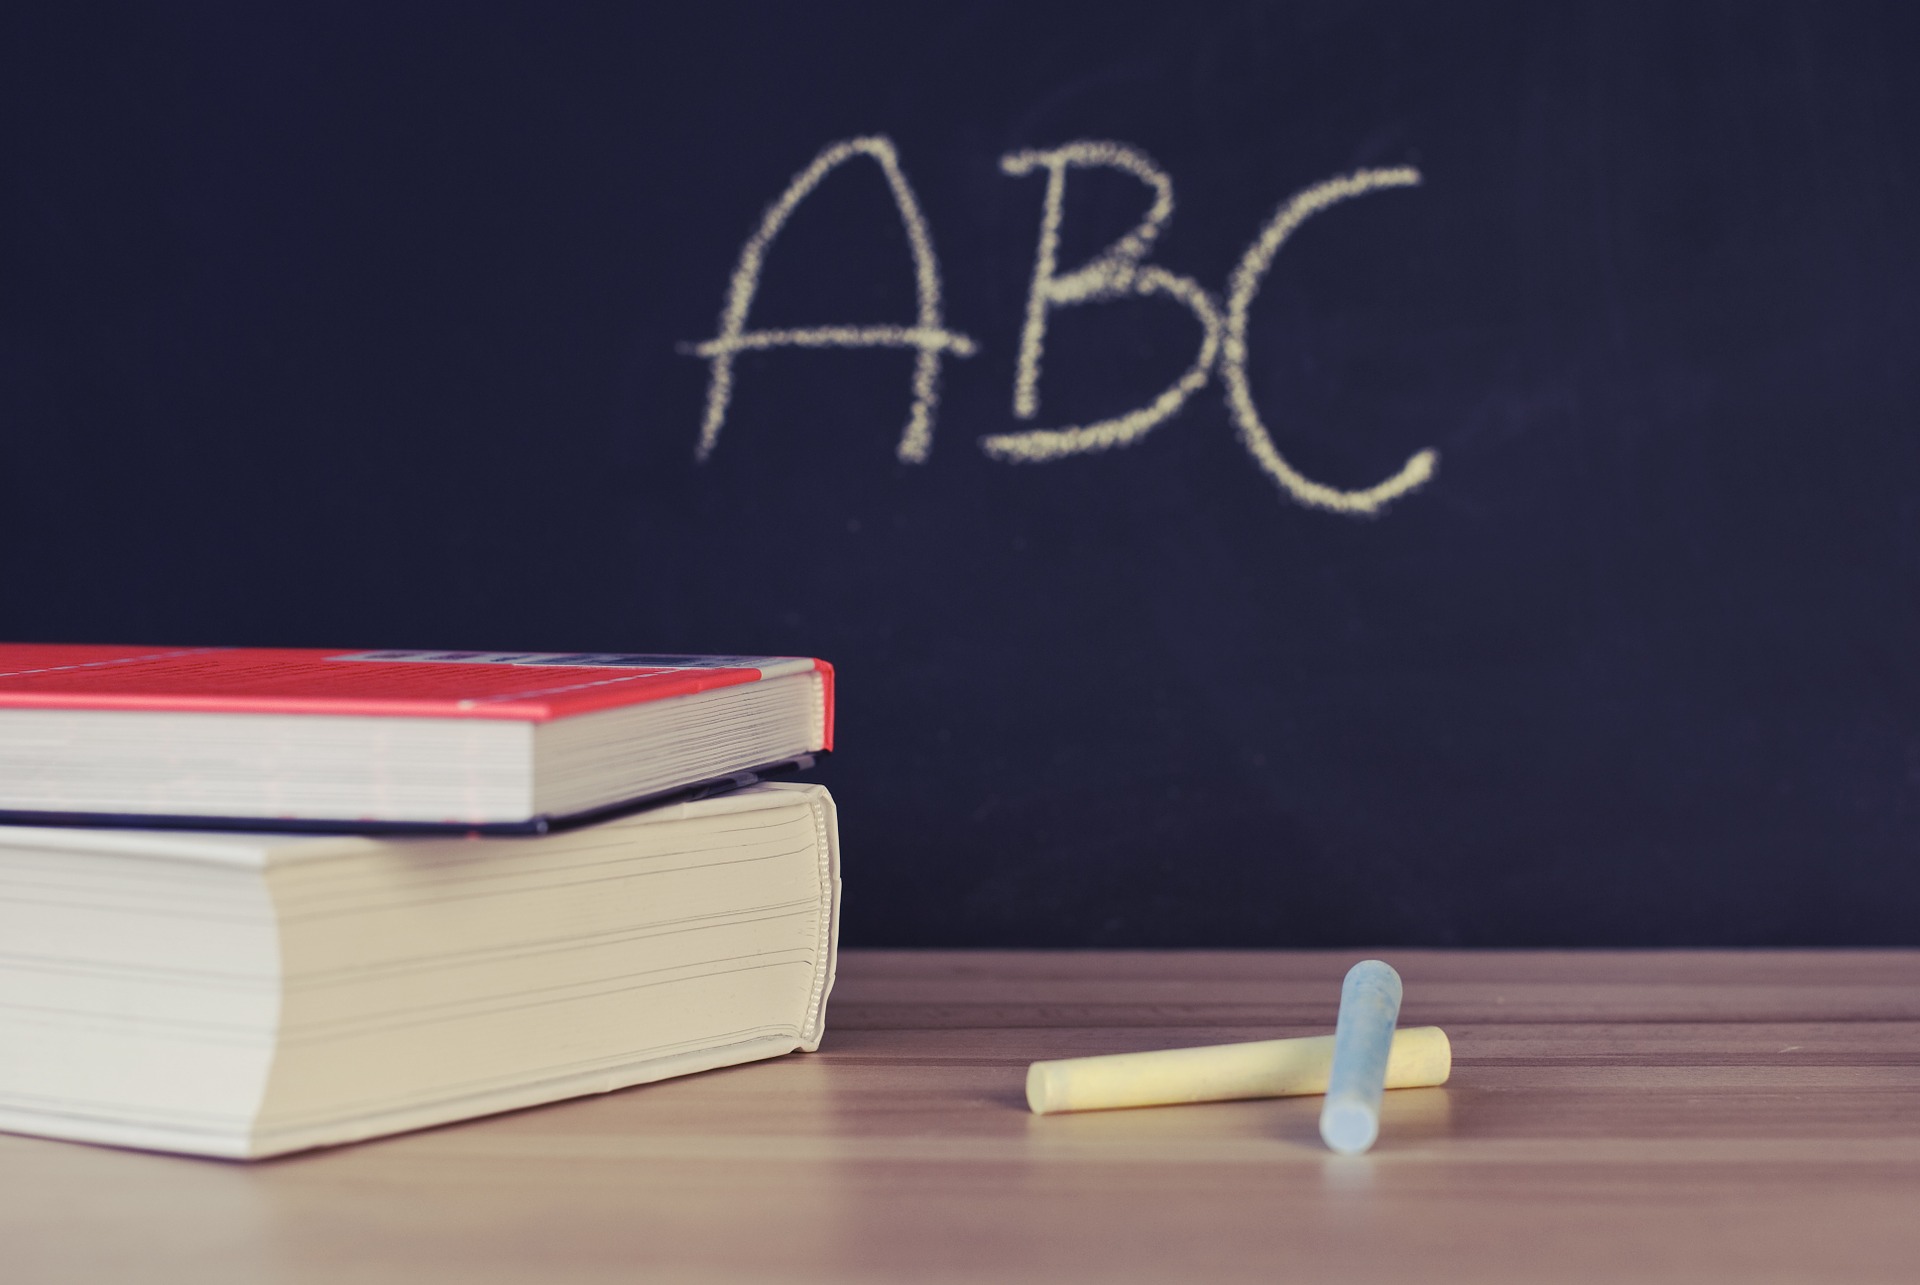 The ABCs of HVAC: An Easy to Understand HVAC Glossary